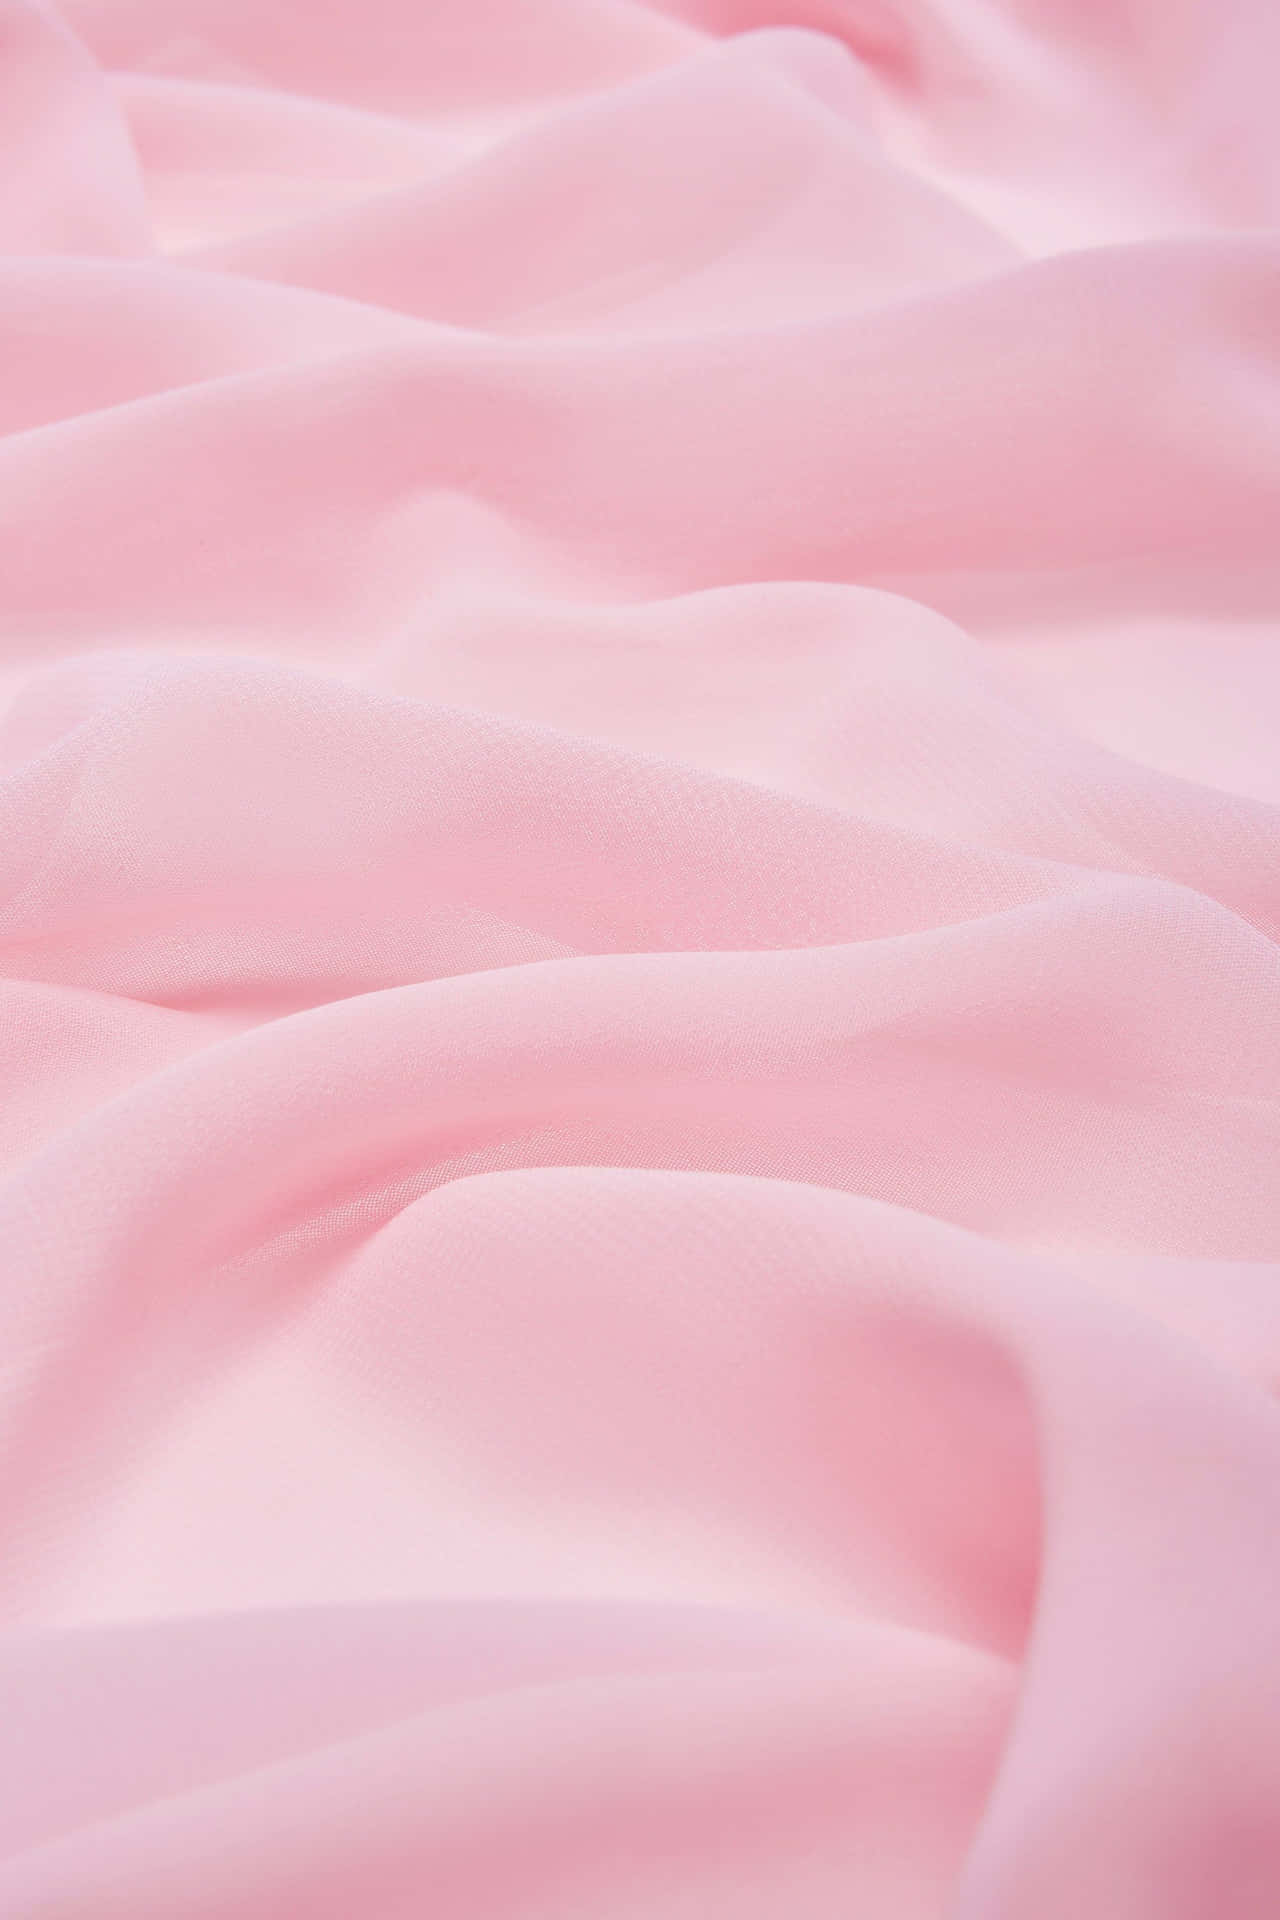 Enjoy a sugarsweet moment with Pink Cotton Candy! Wallpaper